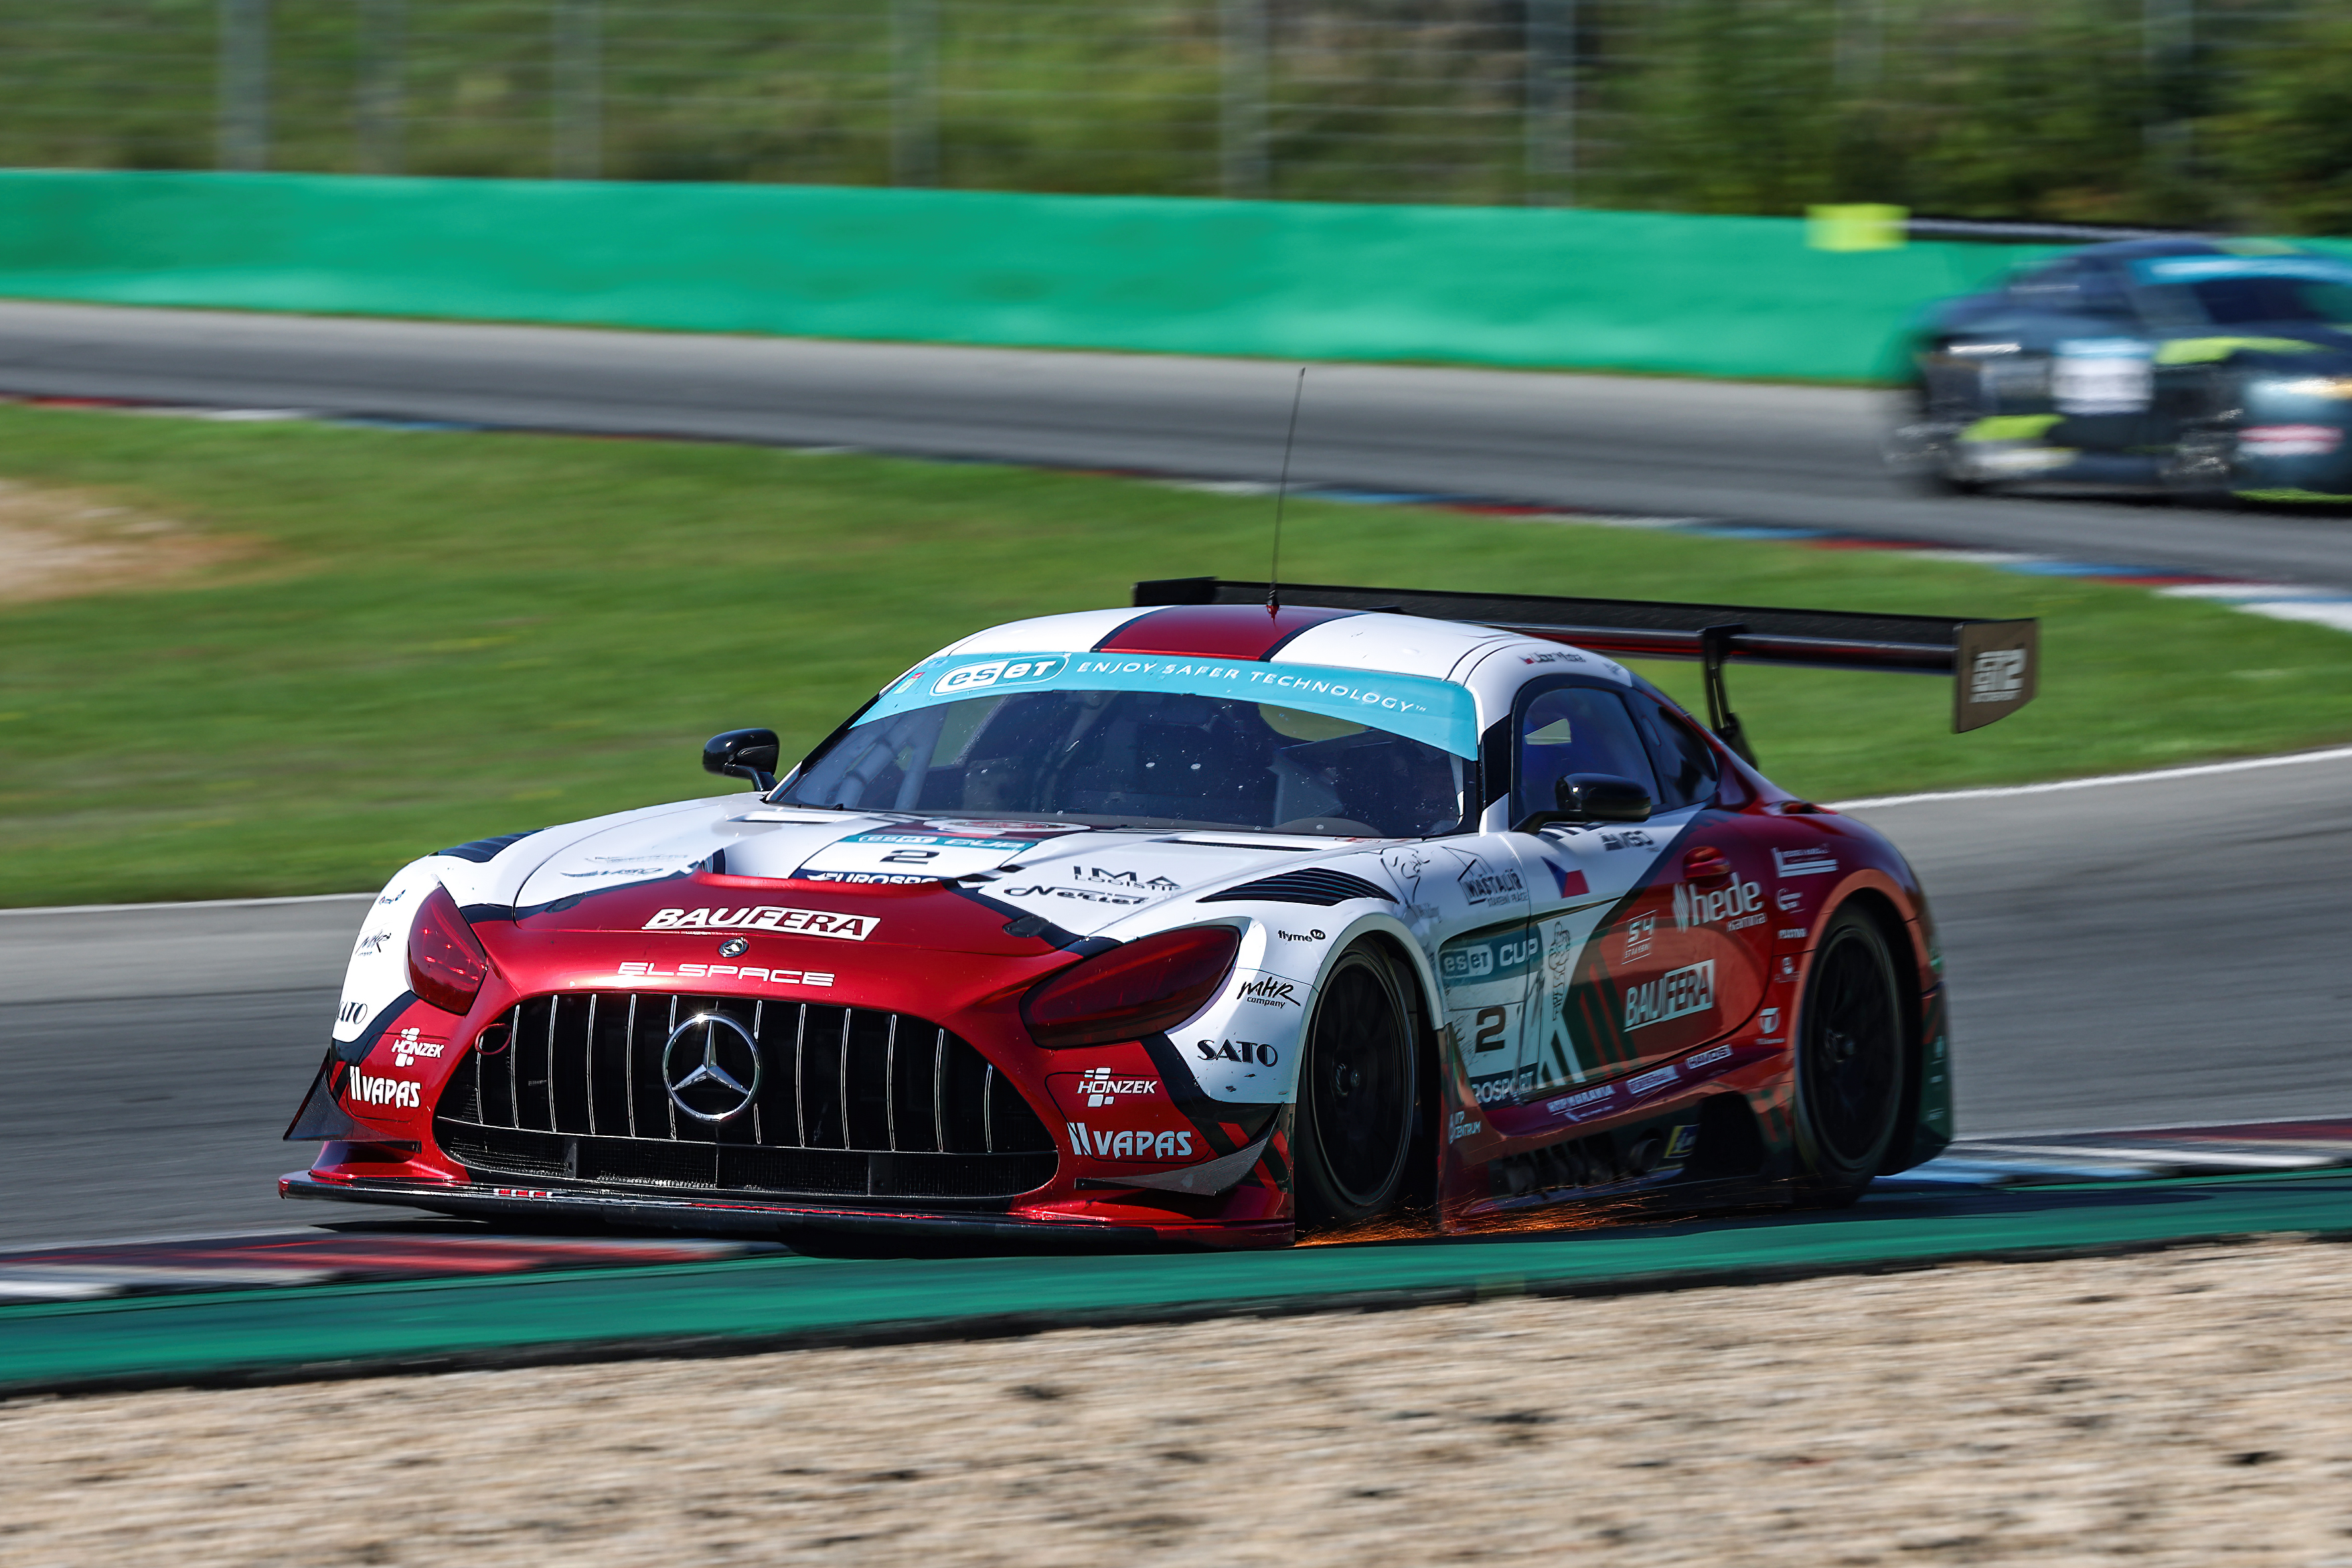 From ESET Cup to GT Open. Libor Milota’s journey with a red and white Mercedes